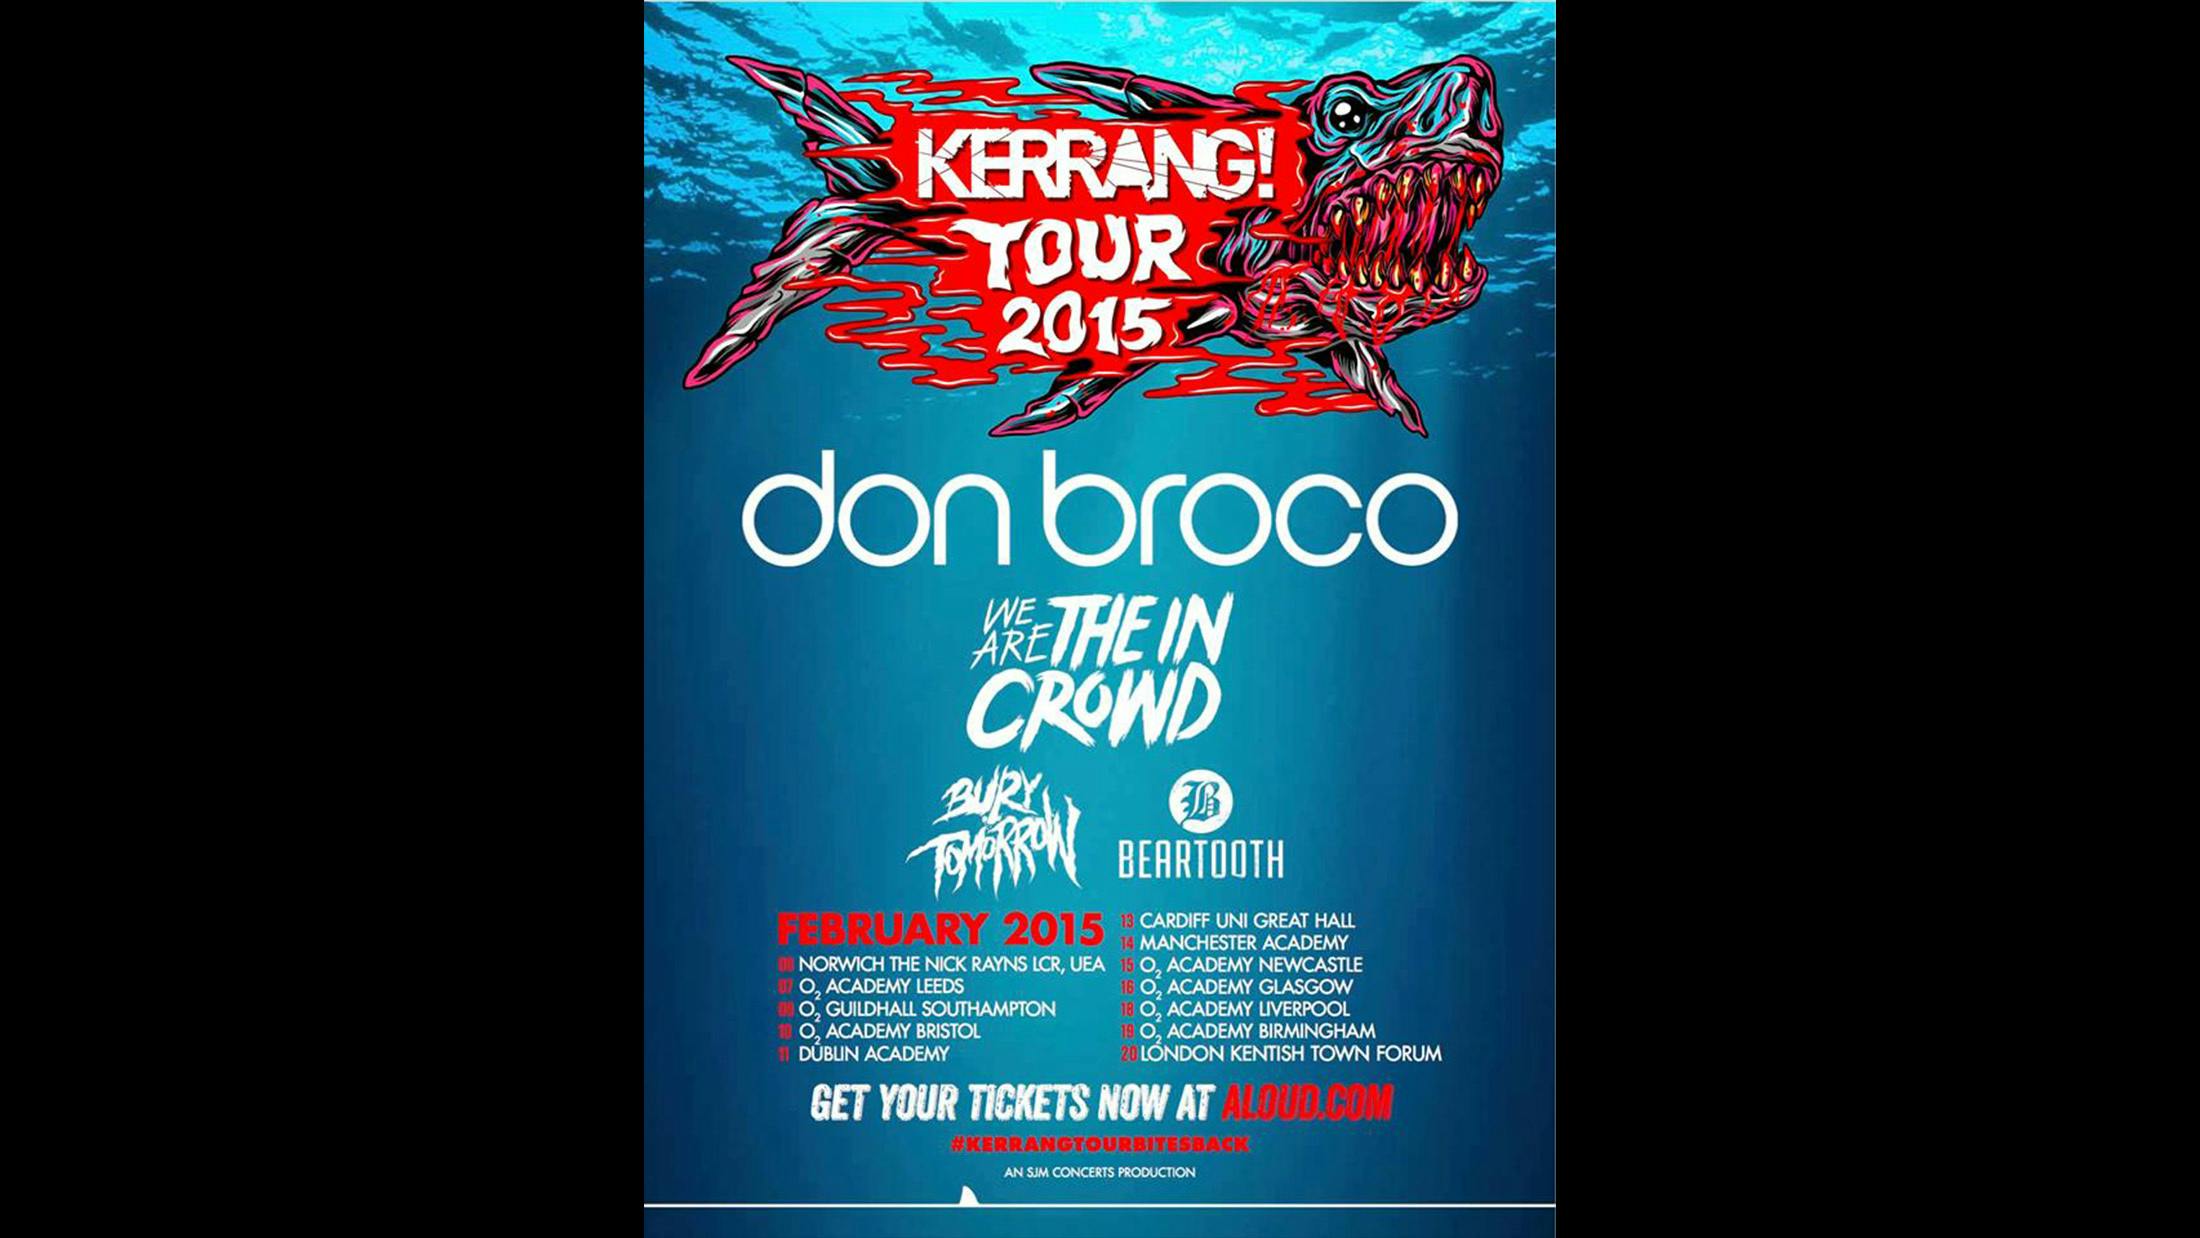 Those who bought tickets to the tenth Kerrang! Tour got an added bonus in the shape of Young Guns, who were added to the bill as a ‘secret’ act. They joined headliners Don Broco, We Are The In Crowd, Bury Tomorrow and Beartooth on the 12-date tour which kicked off in Norwich and left a trail of, well, tidy dressing rooms across the UK and Ireland. Notable moments of time-killing included Don Broco tour manager Adam Bantz (his real surname) getting a tattoo of Rob Damiani’s face on his leg during a day off in Glasgow, while Bury Tomorrow and Young Guns went head-to-head in a haircut competition. Bury Tomorrow vocalist Dani Winter-Bates stunned onlookers with a surprising tonsorial flair.